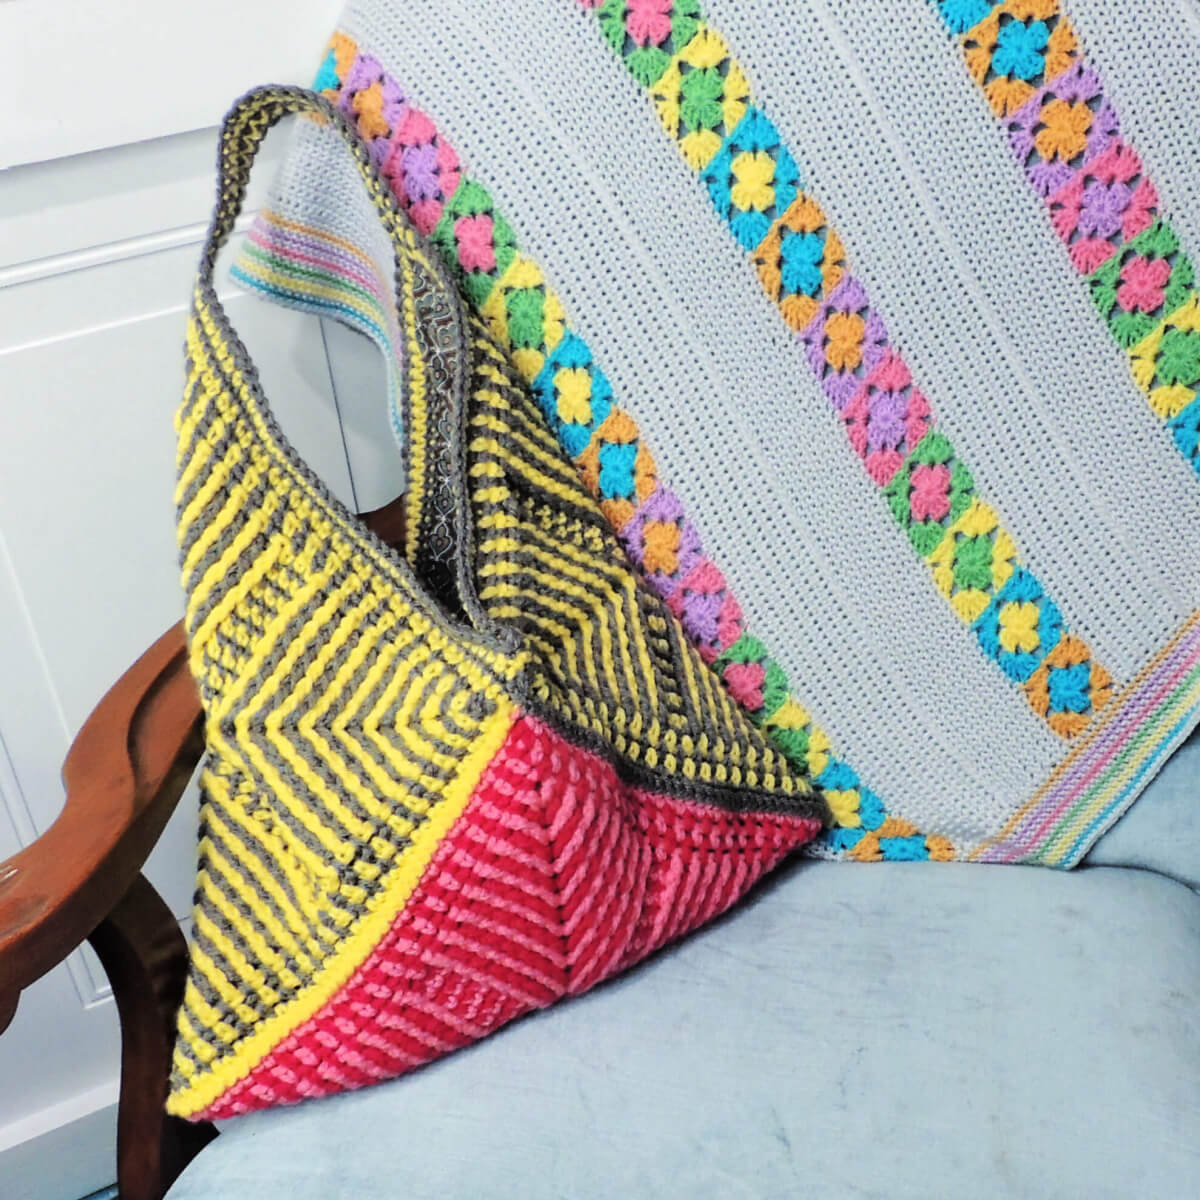 Purse made of three crochet squares folded diagonally. Each has angled stripes pointing in from corners made with post stitches. The bottom is two tone pink and the rest is gray and yellow. Purse leaning against the wood arm of a light blue chair.